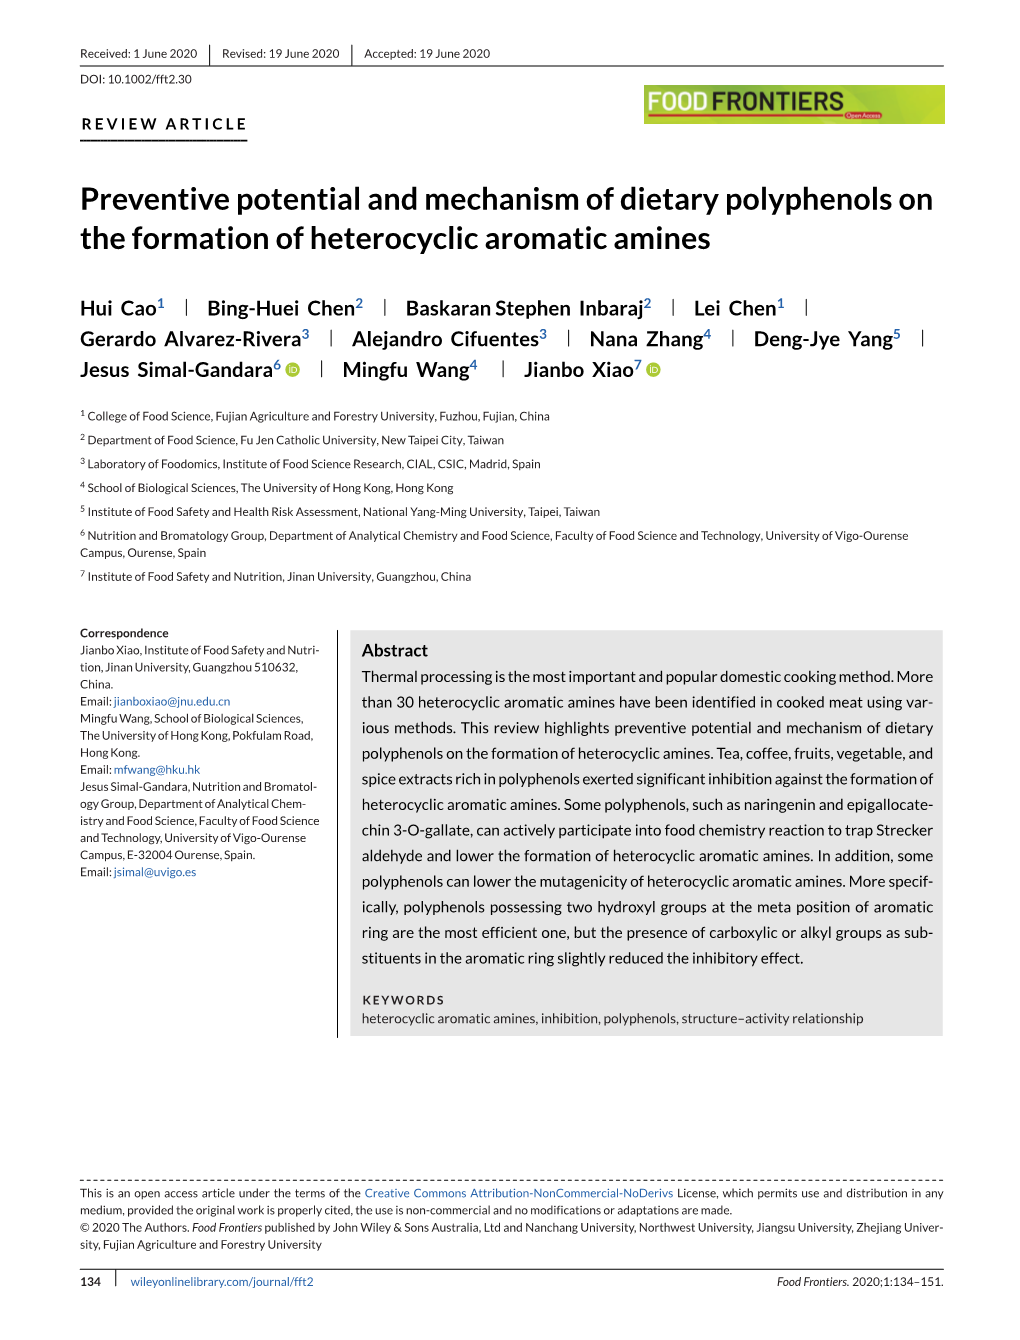 Preventive Potential and Mechanism of Dietary Polyphenols on the Formation of Heterocyclic Aromatic Amines